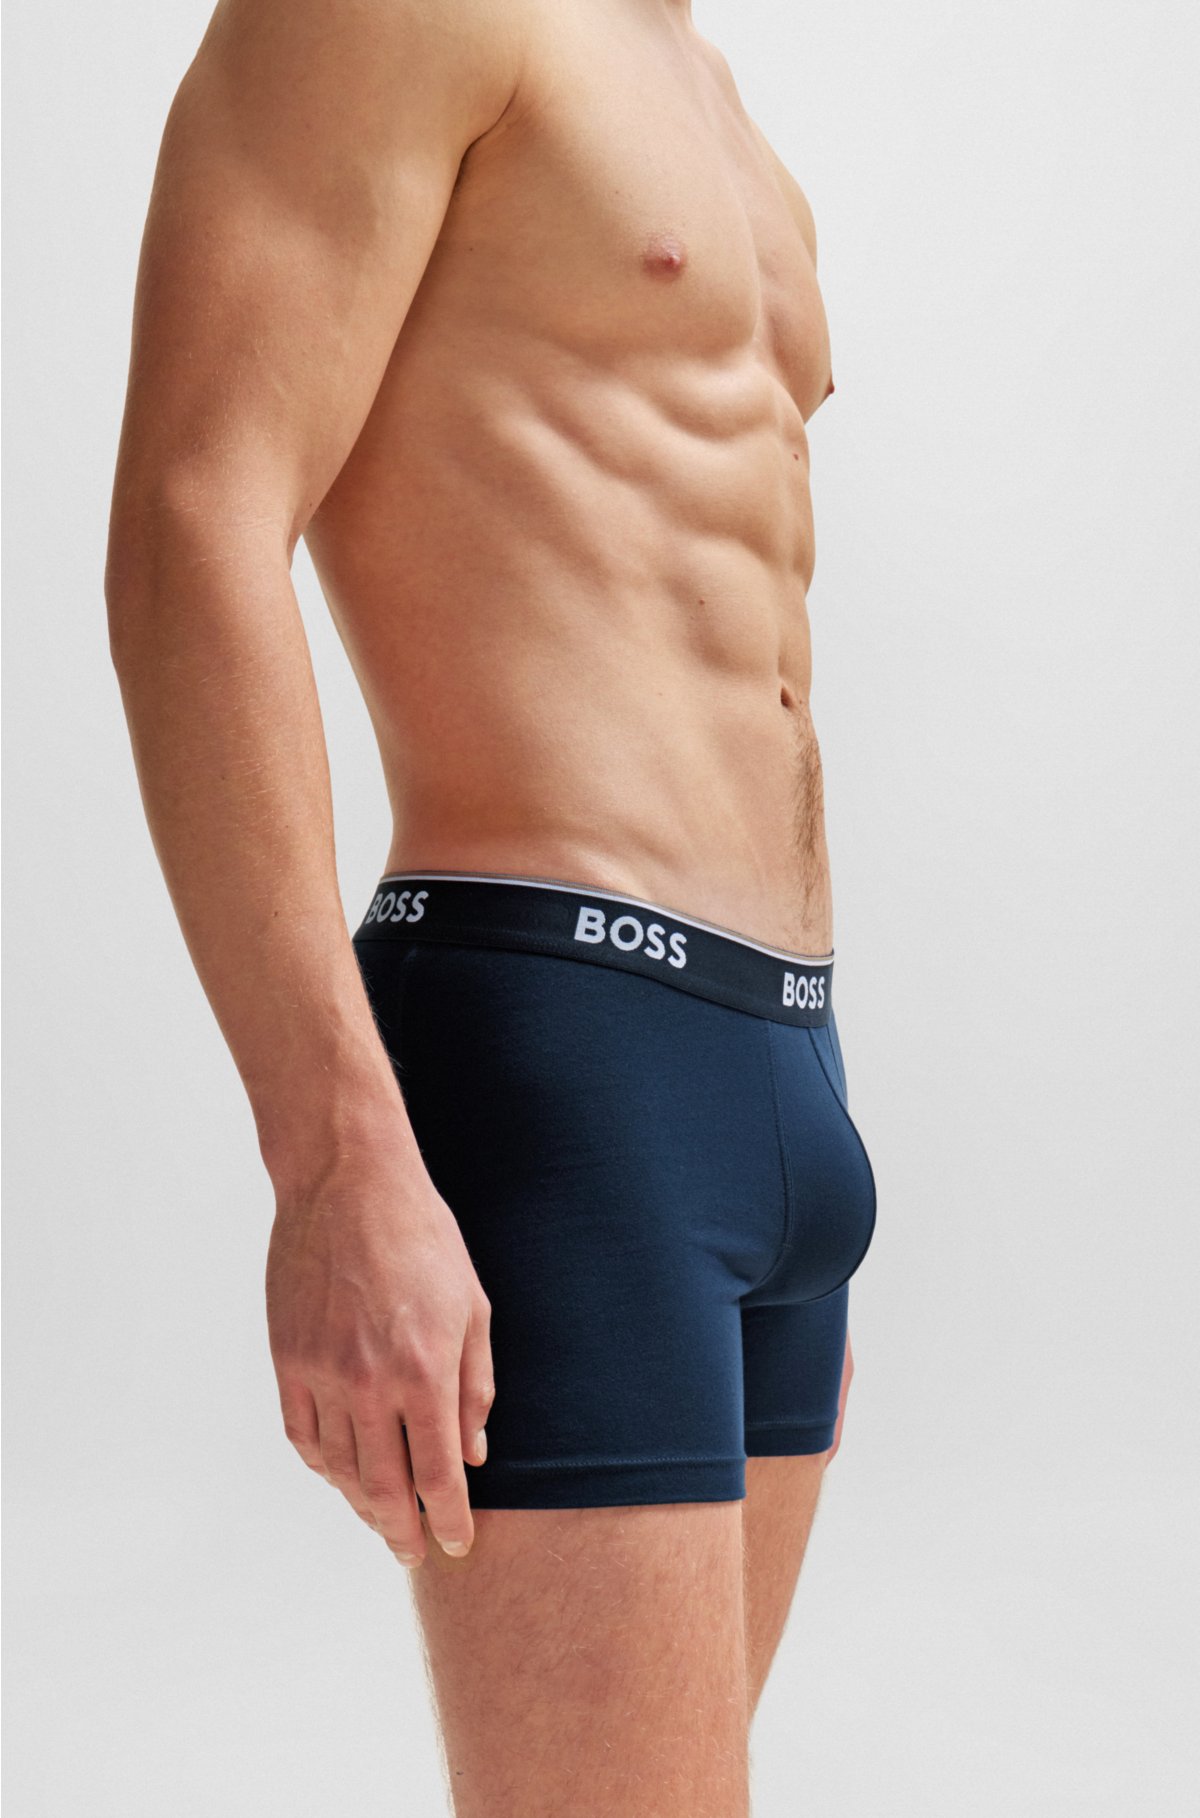 stretch-cotton with Three-pack boxer - briefs logos BOSS of